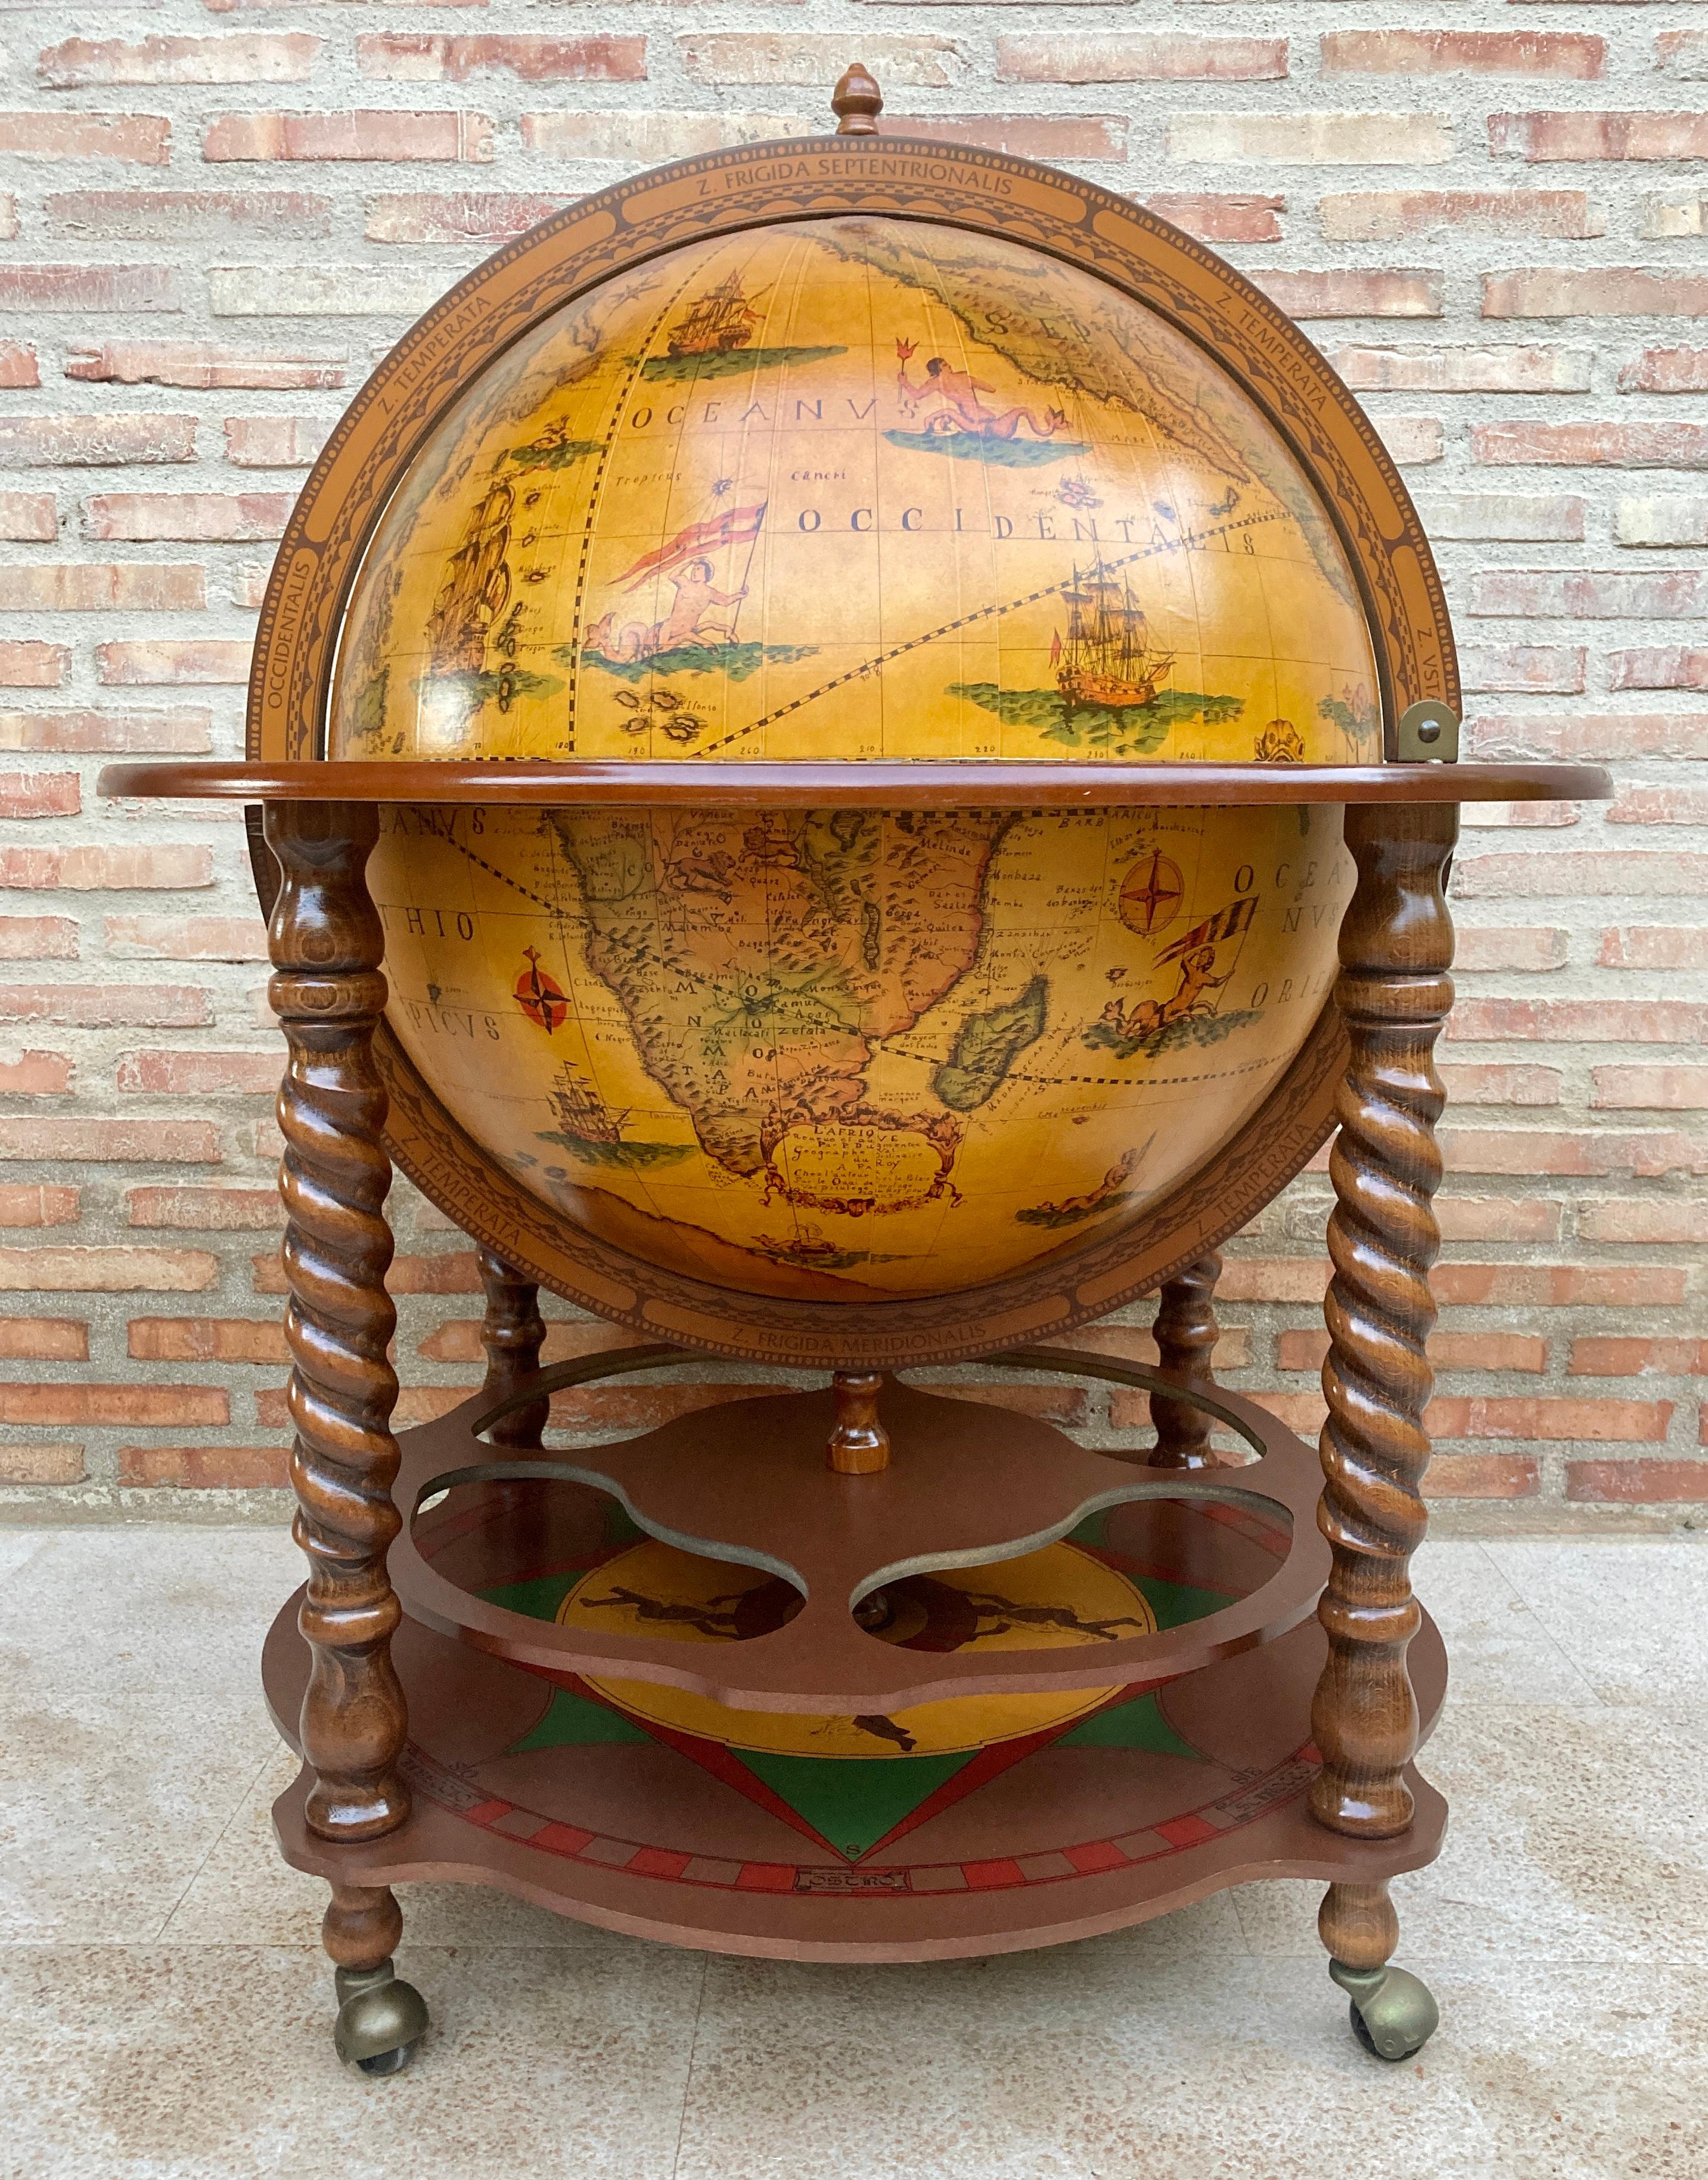 This vintage 1960s Italian dry bar is perfect for adding a touch of classic European flair to your home. The globe design is made of wood, giving it an authentic and timeless look. The wood is finished with a rich walnut stain, bringing out the